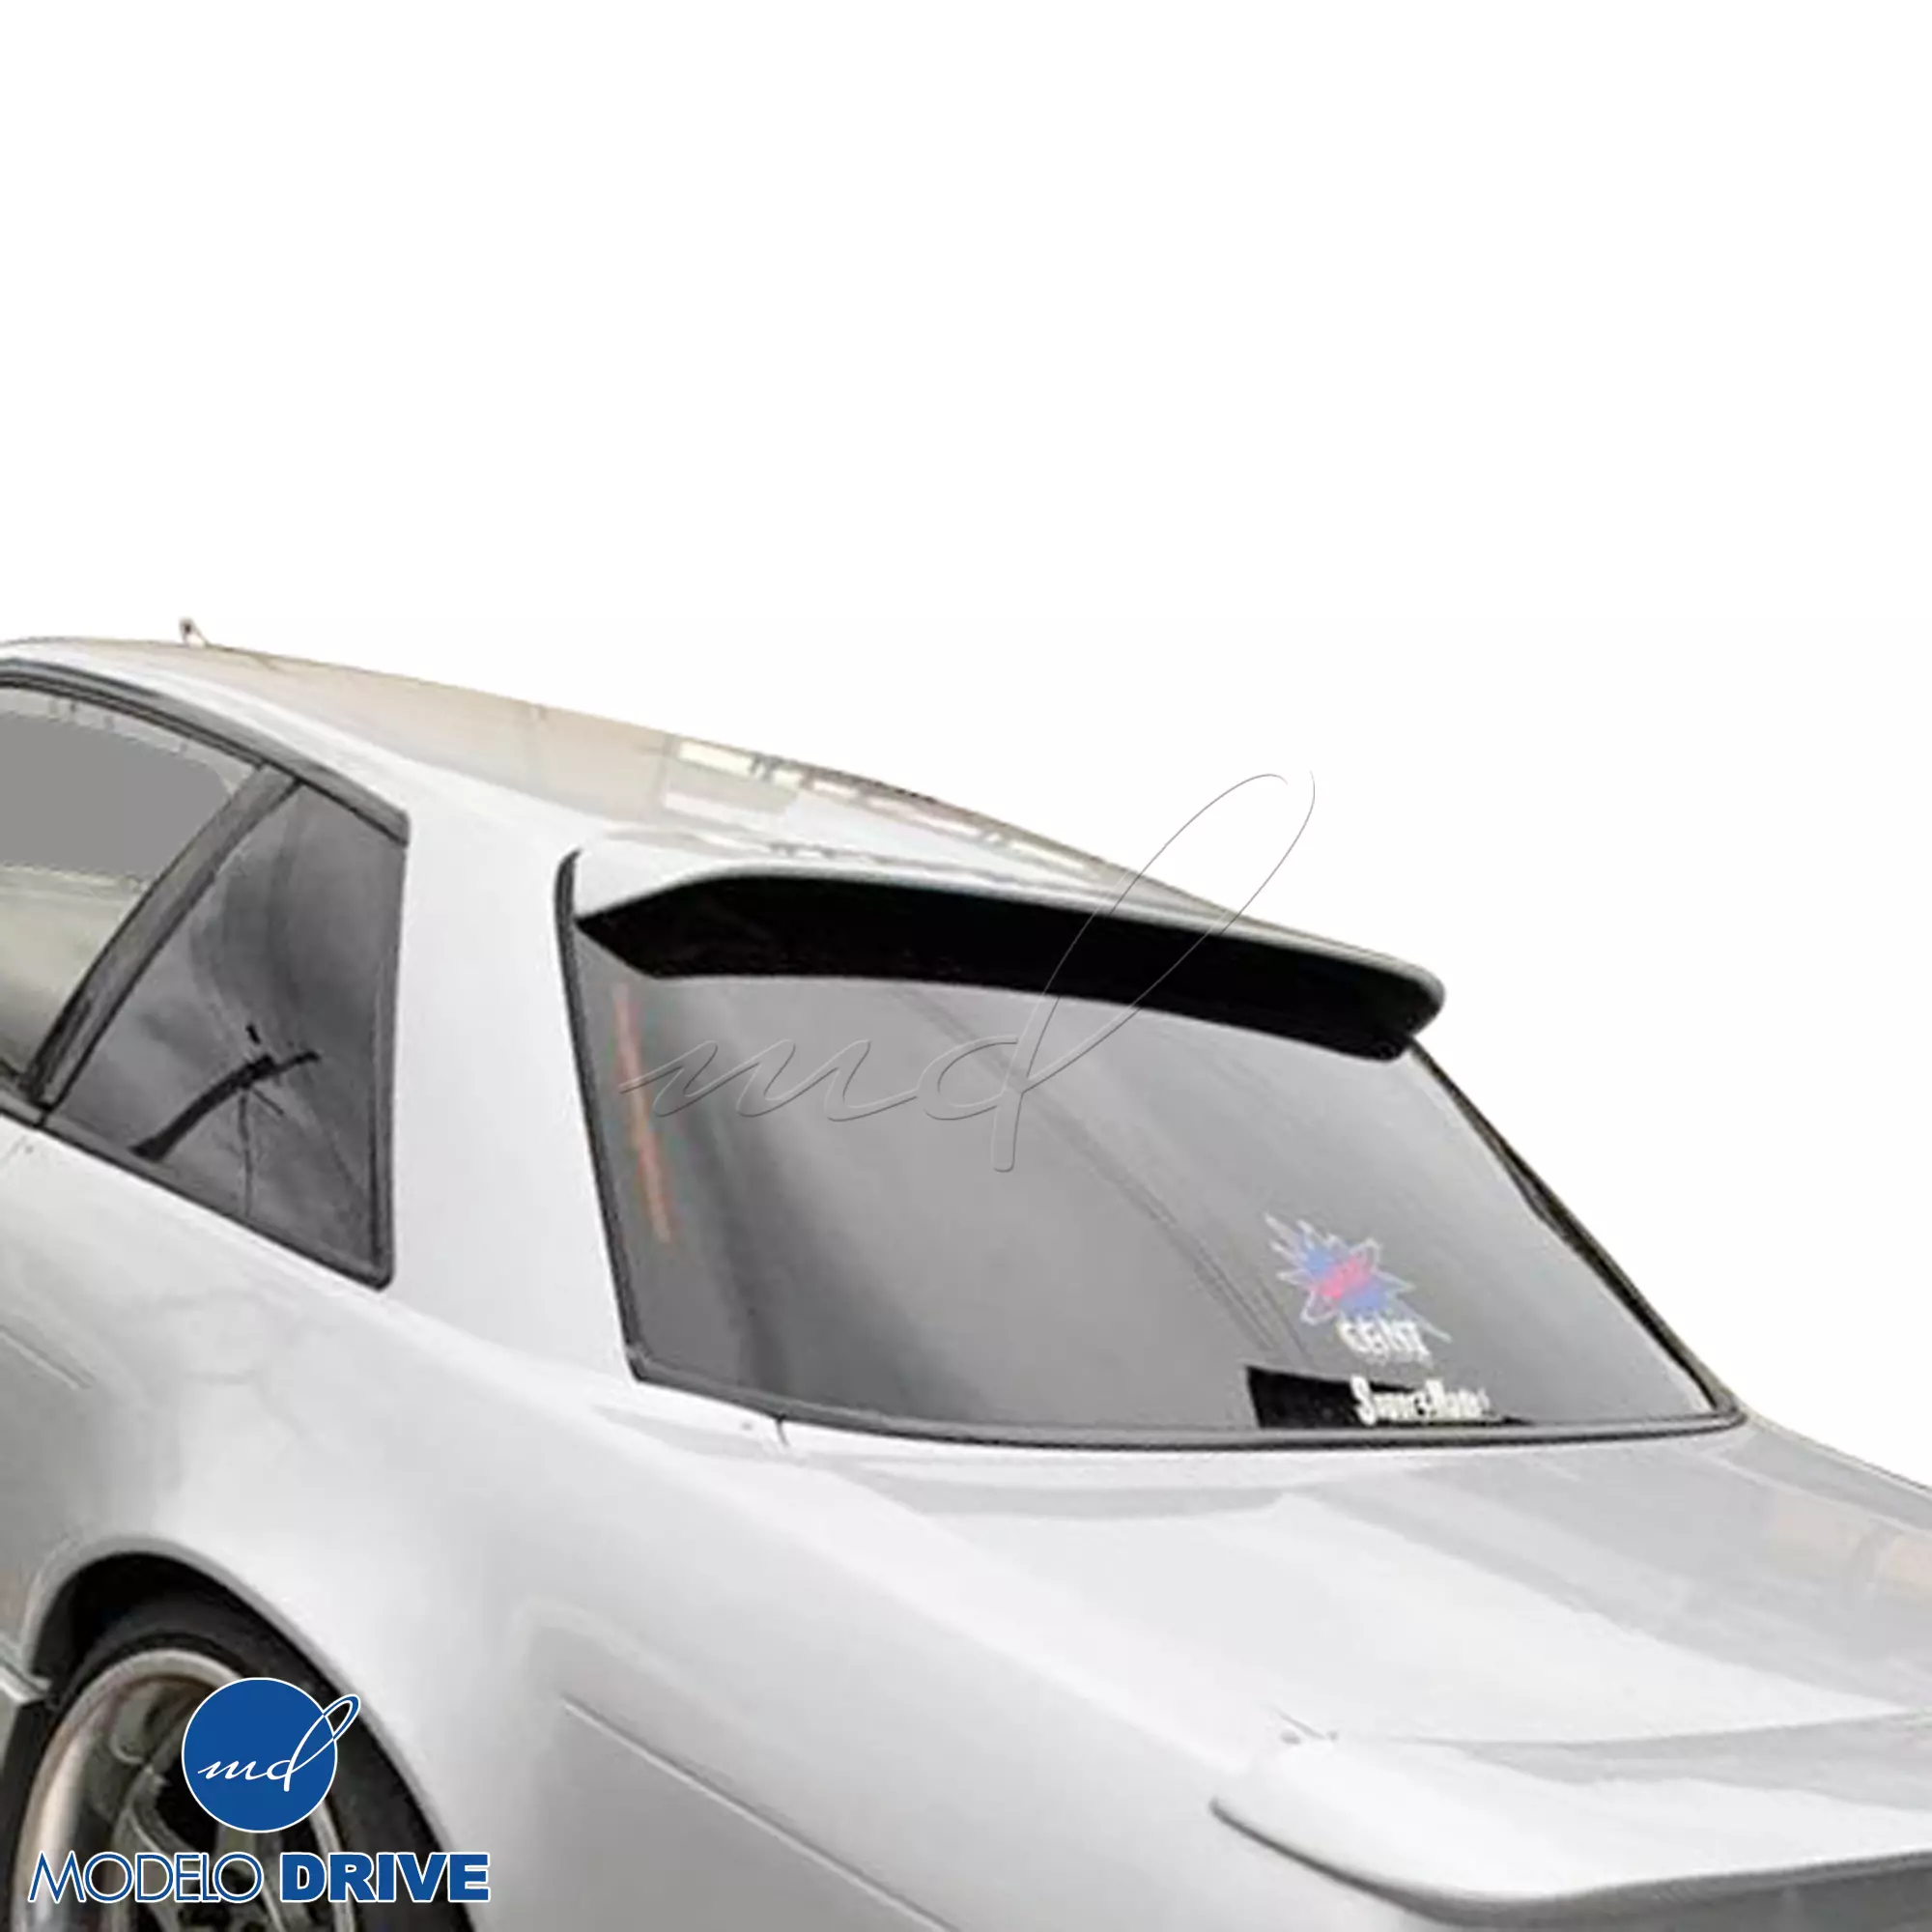 ModeloDrive FRP DMA Roof Spoiler Wing > Nissan 240SX 1989-1994 > 2dr Coupe - Image 16